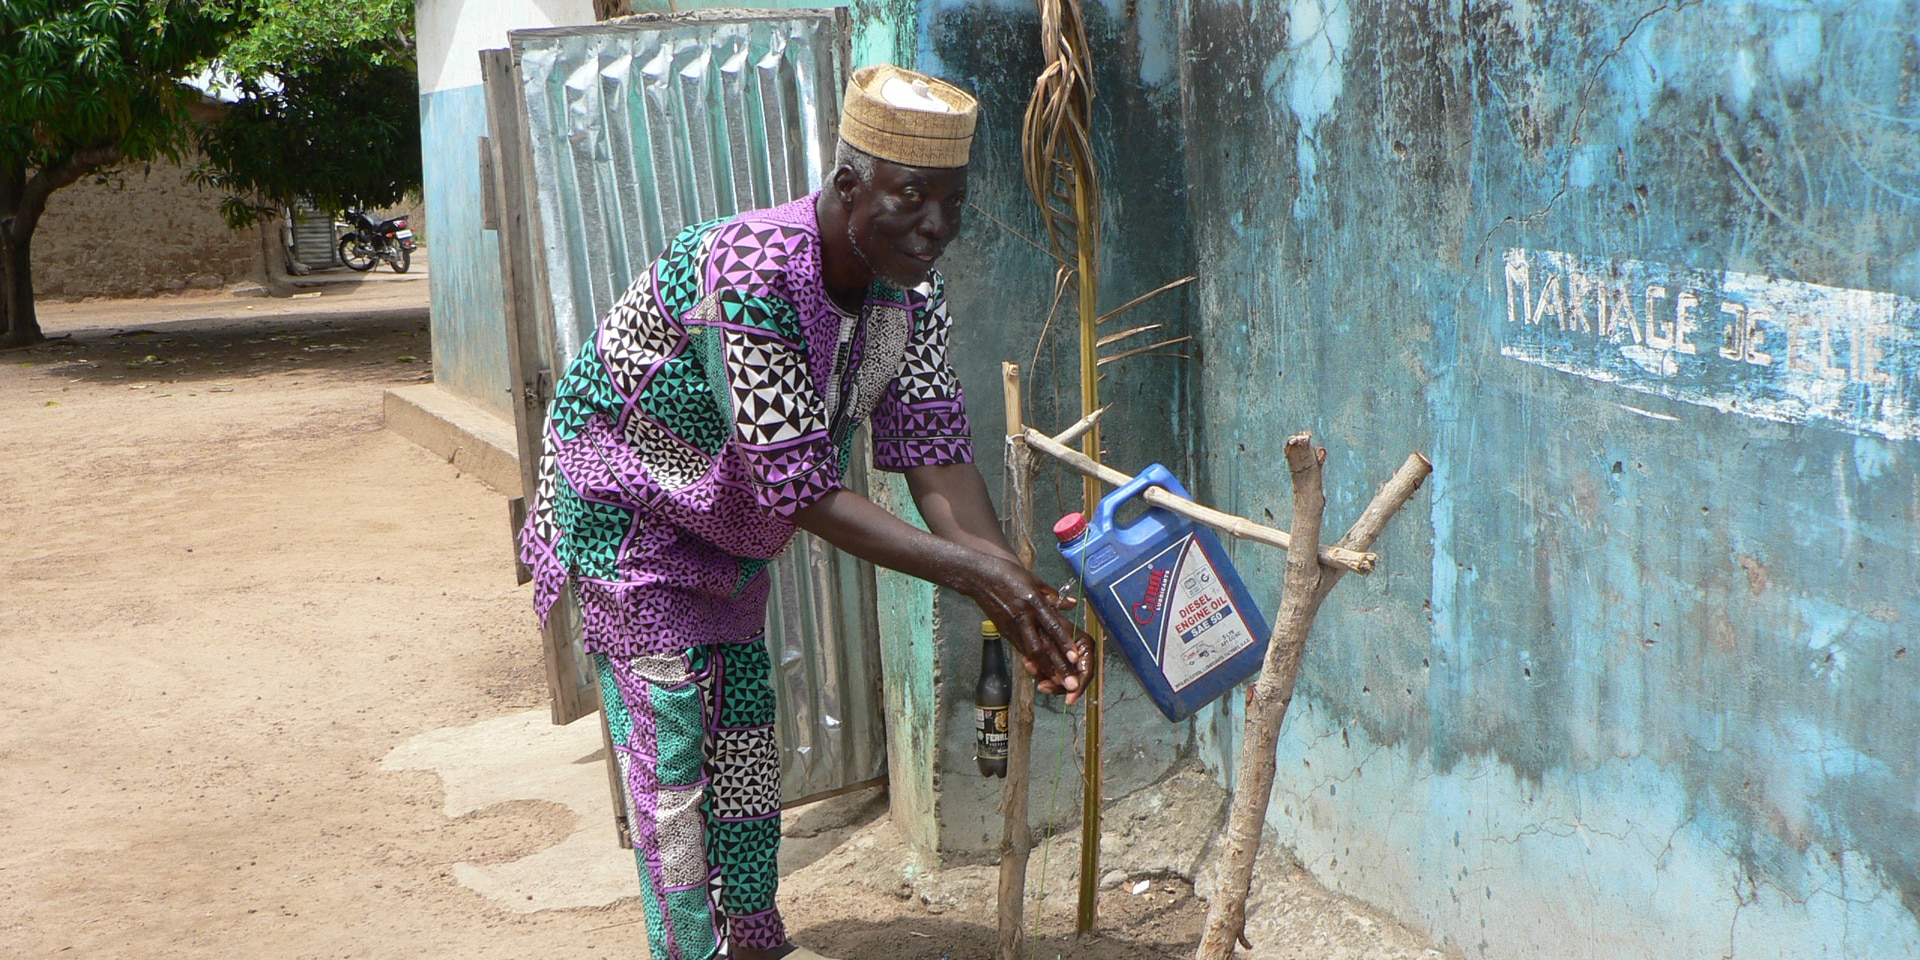 In Benin, a man stands in front of a hut and washes his hands thoroughly at a makeshift handwashing station.